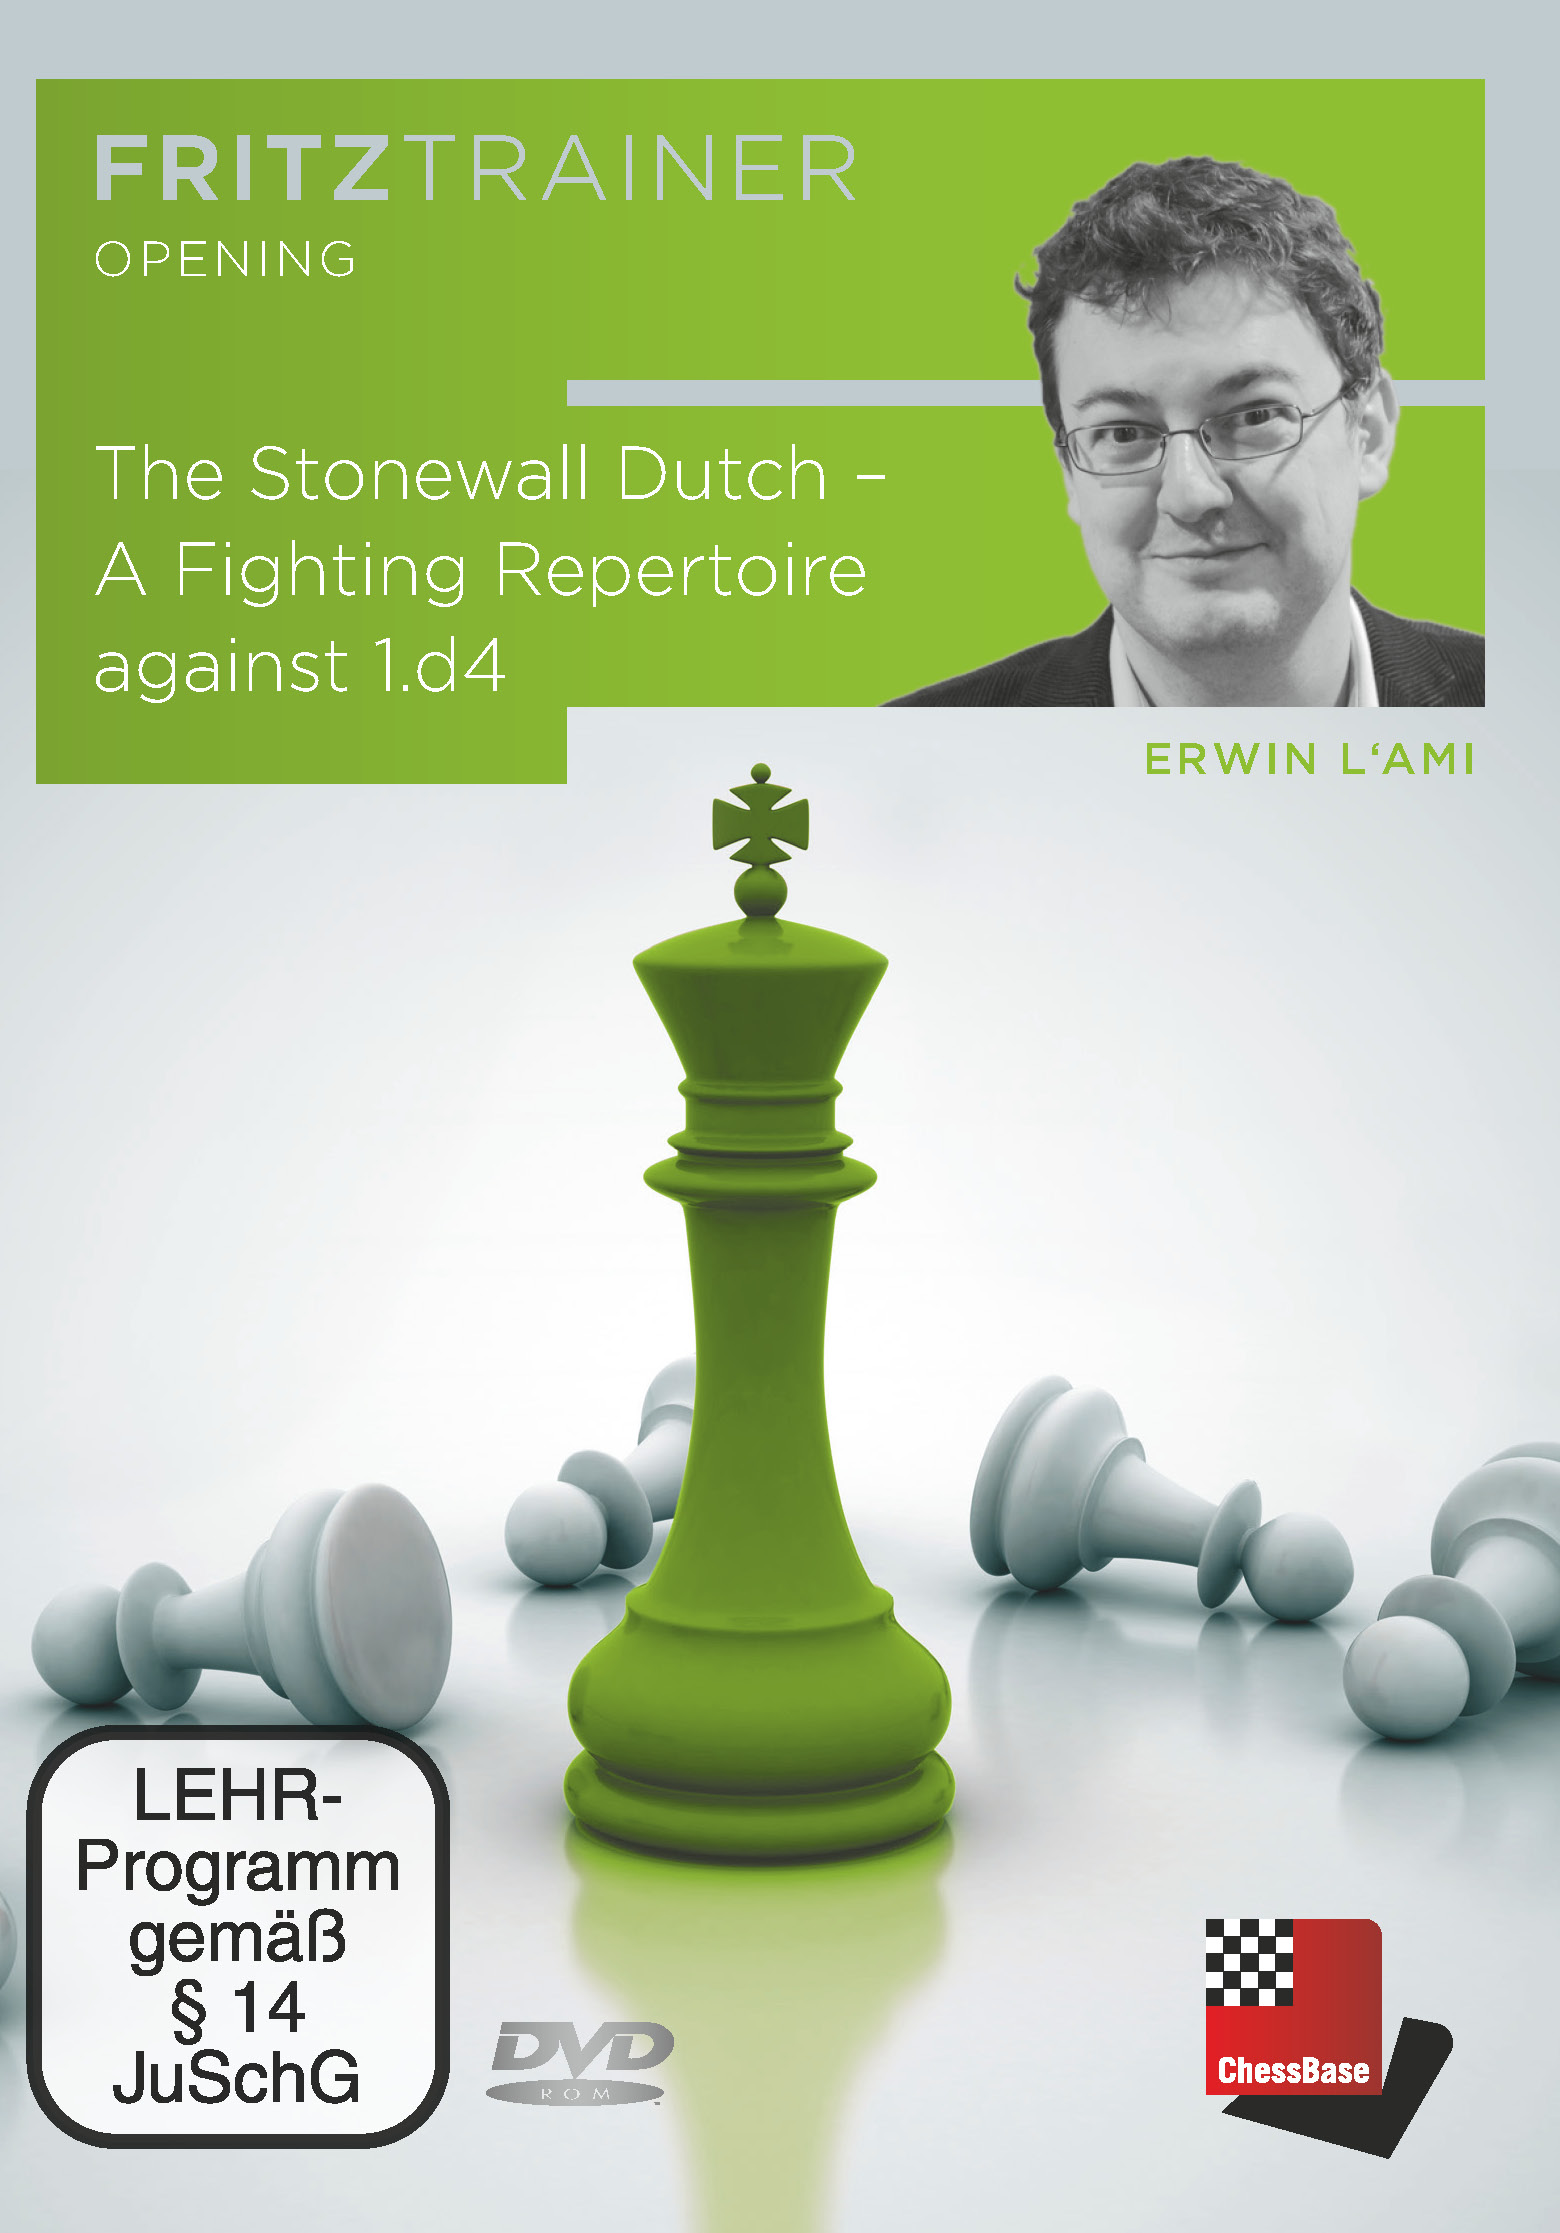 The Dutch Stonewall - A fighting repertoire against 1.d4